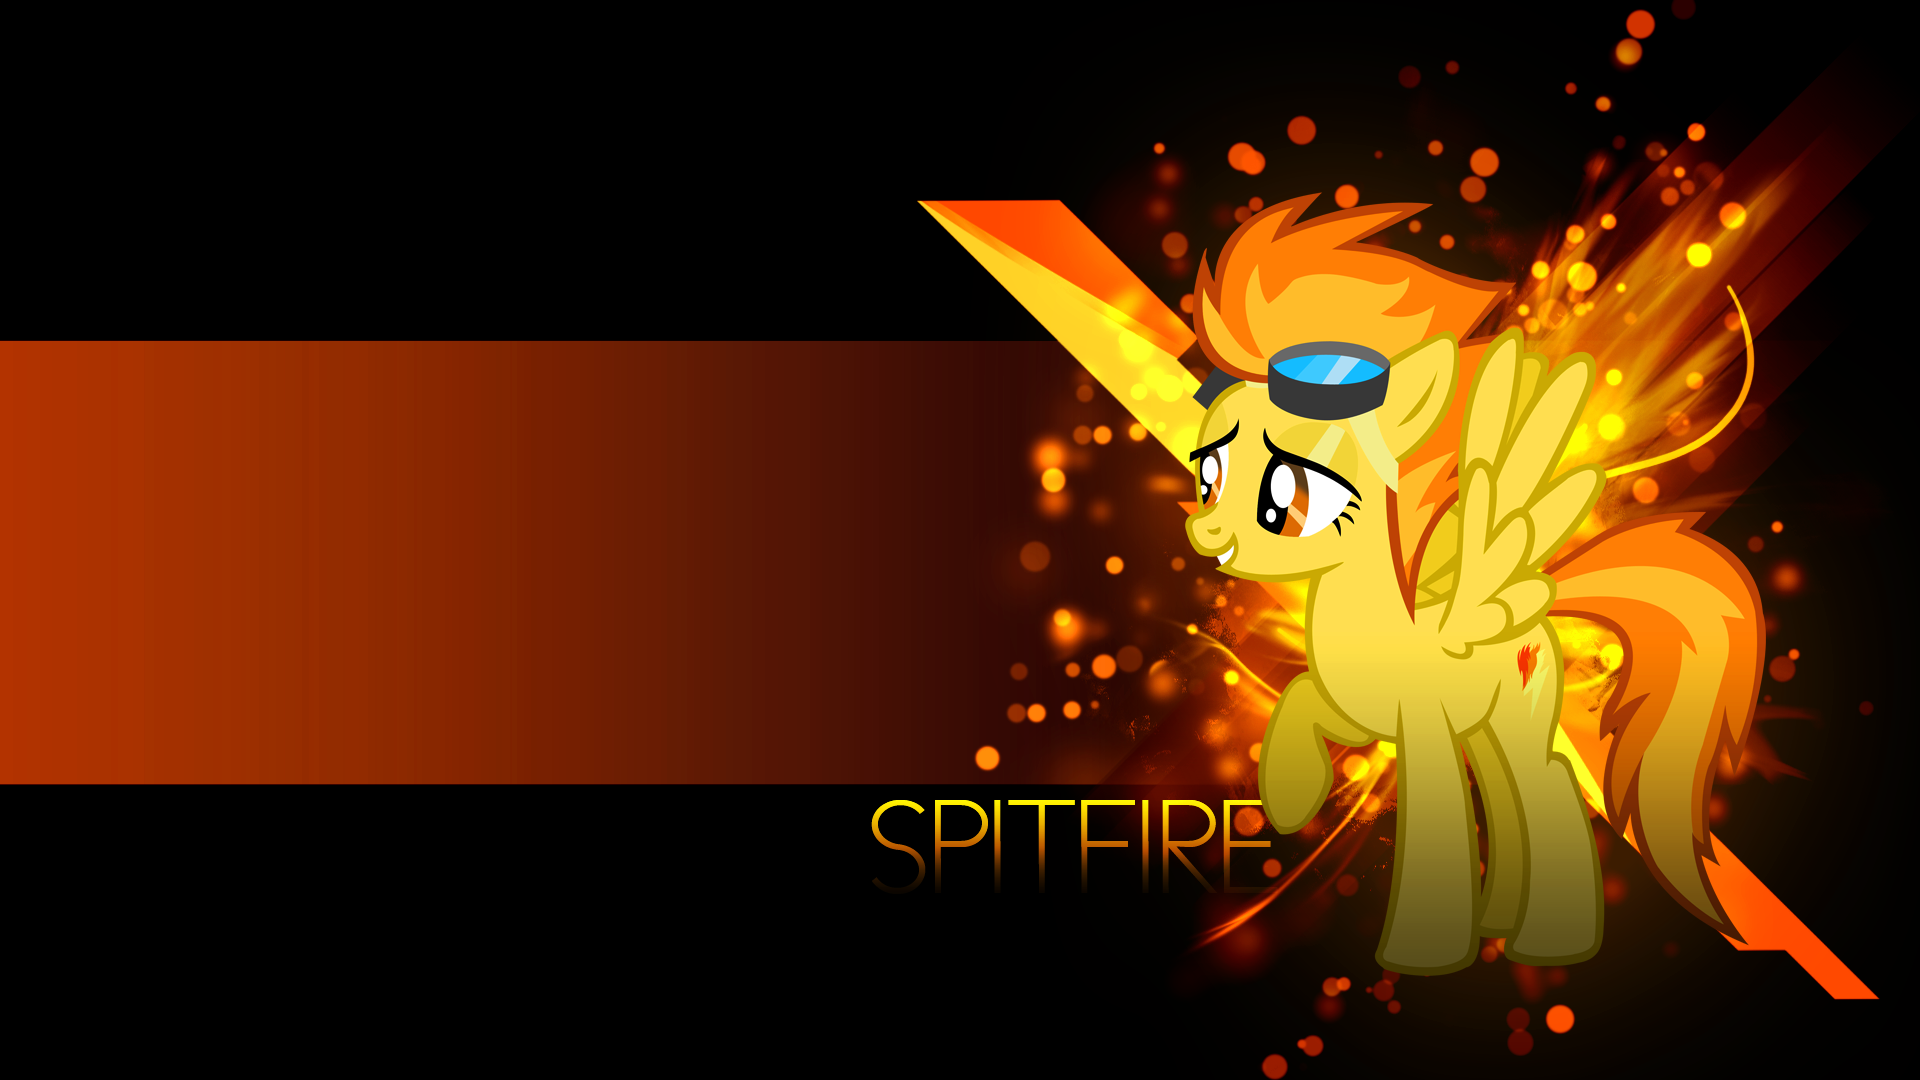 Spitfire's Embers by Durpy and owlet57